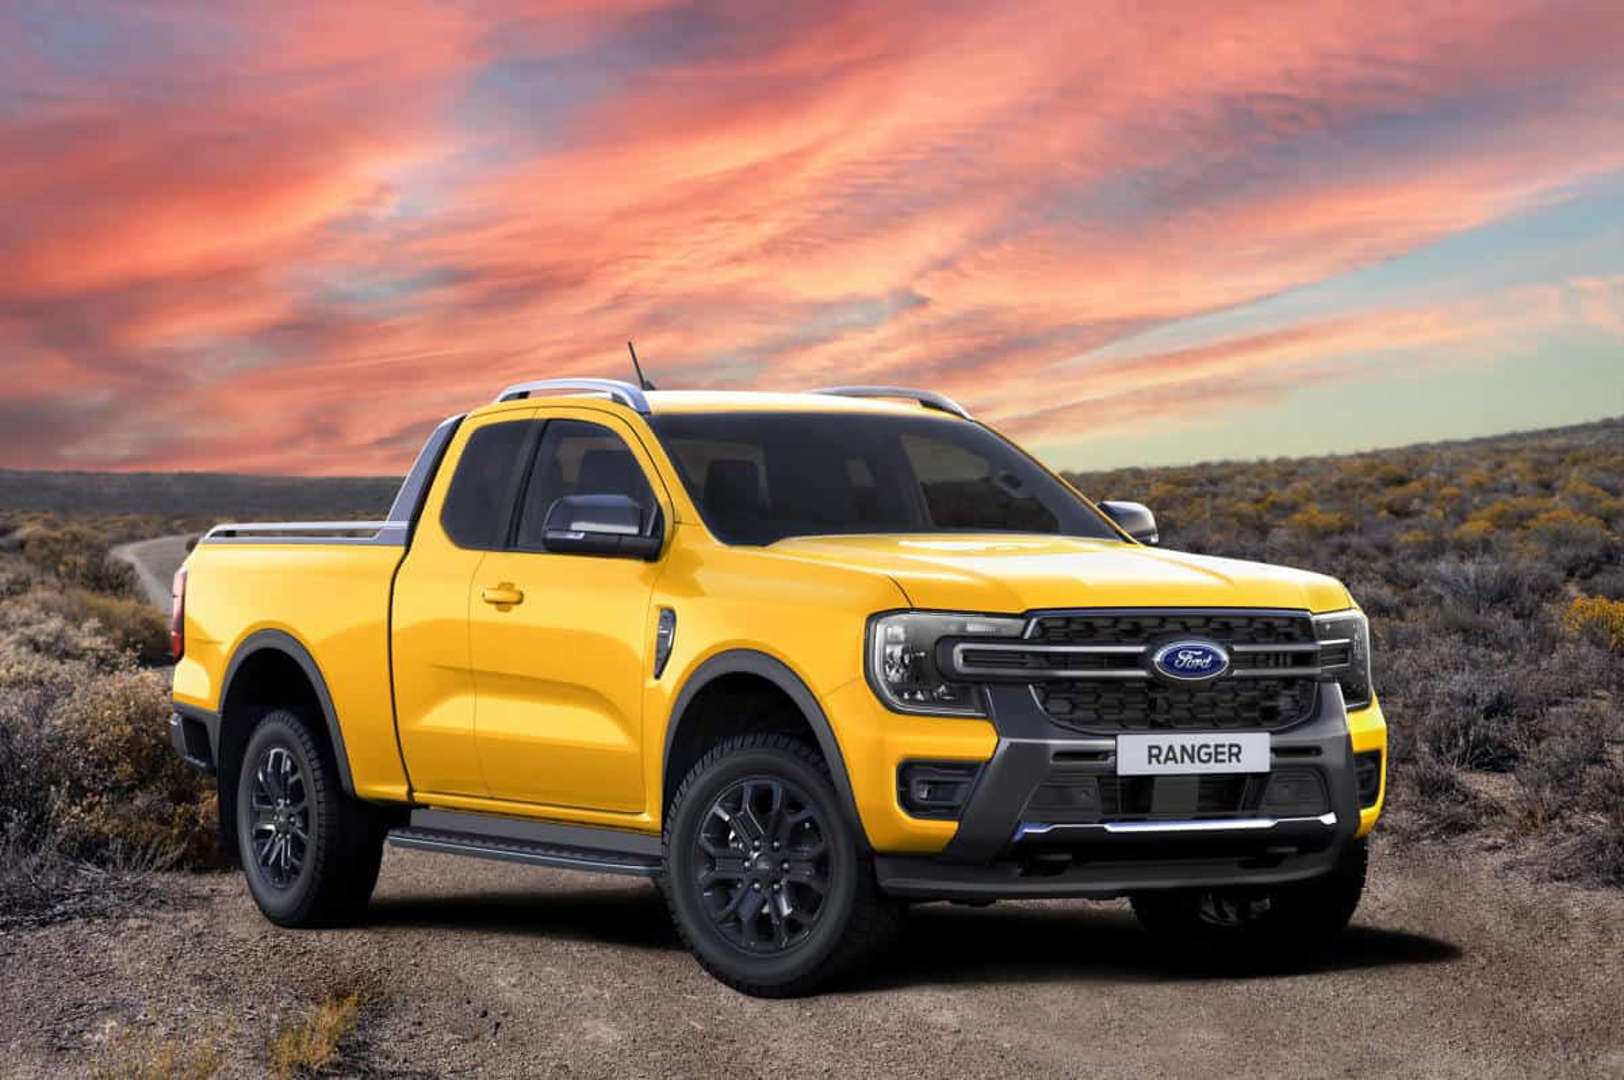 NextGeneration Ford Ranger Lineup Expands with Launch of Single Cab